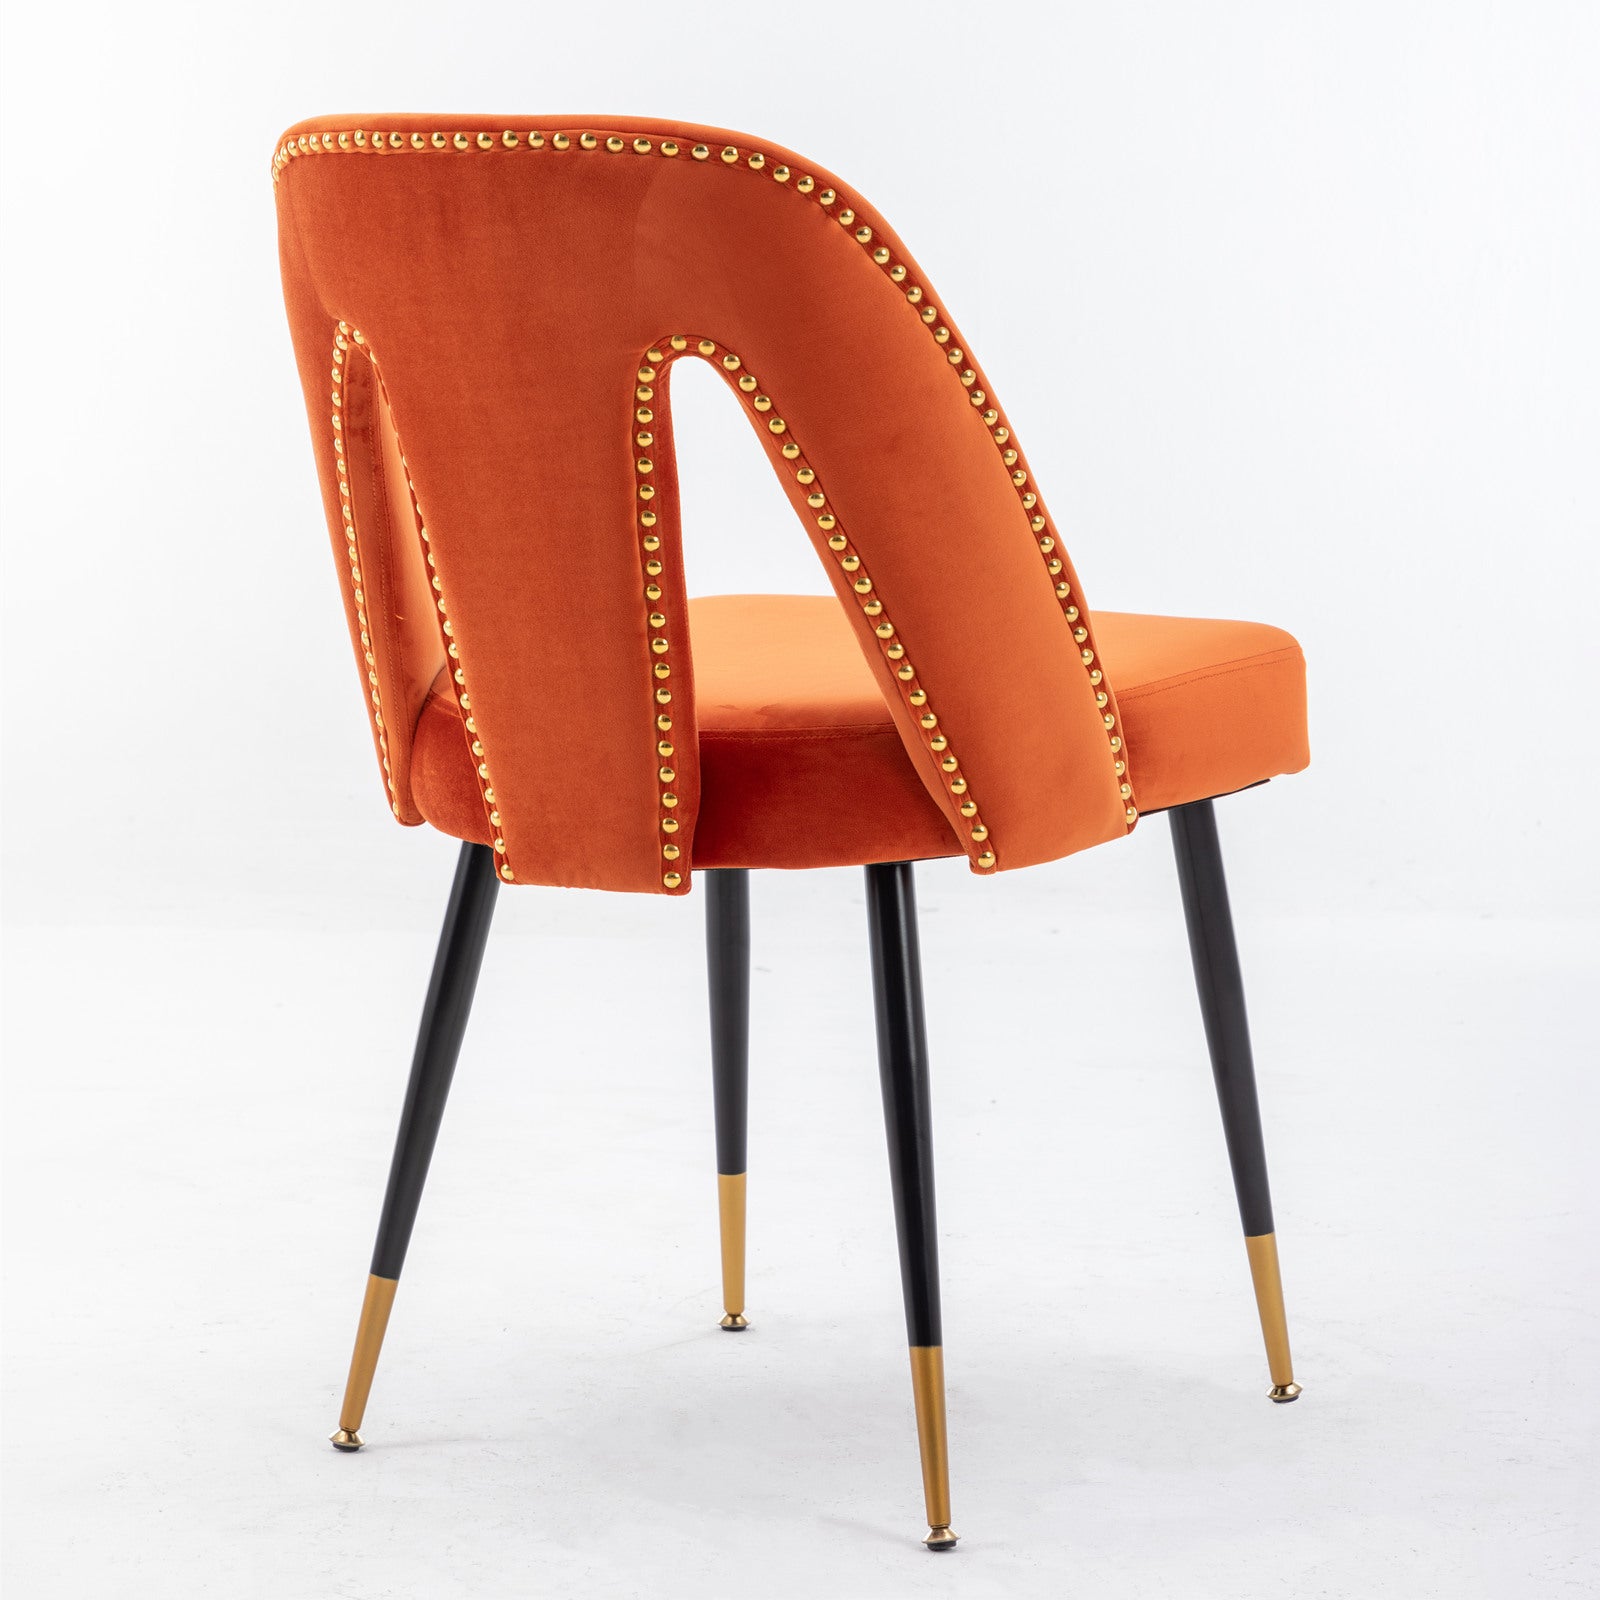 Contemporary Velvet Upholstered Dining Chair with Nailheads and Gold Tipped Black Metal Legs (Set of 2) - Orange